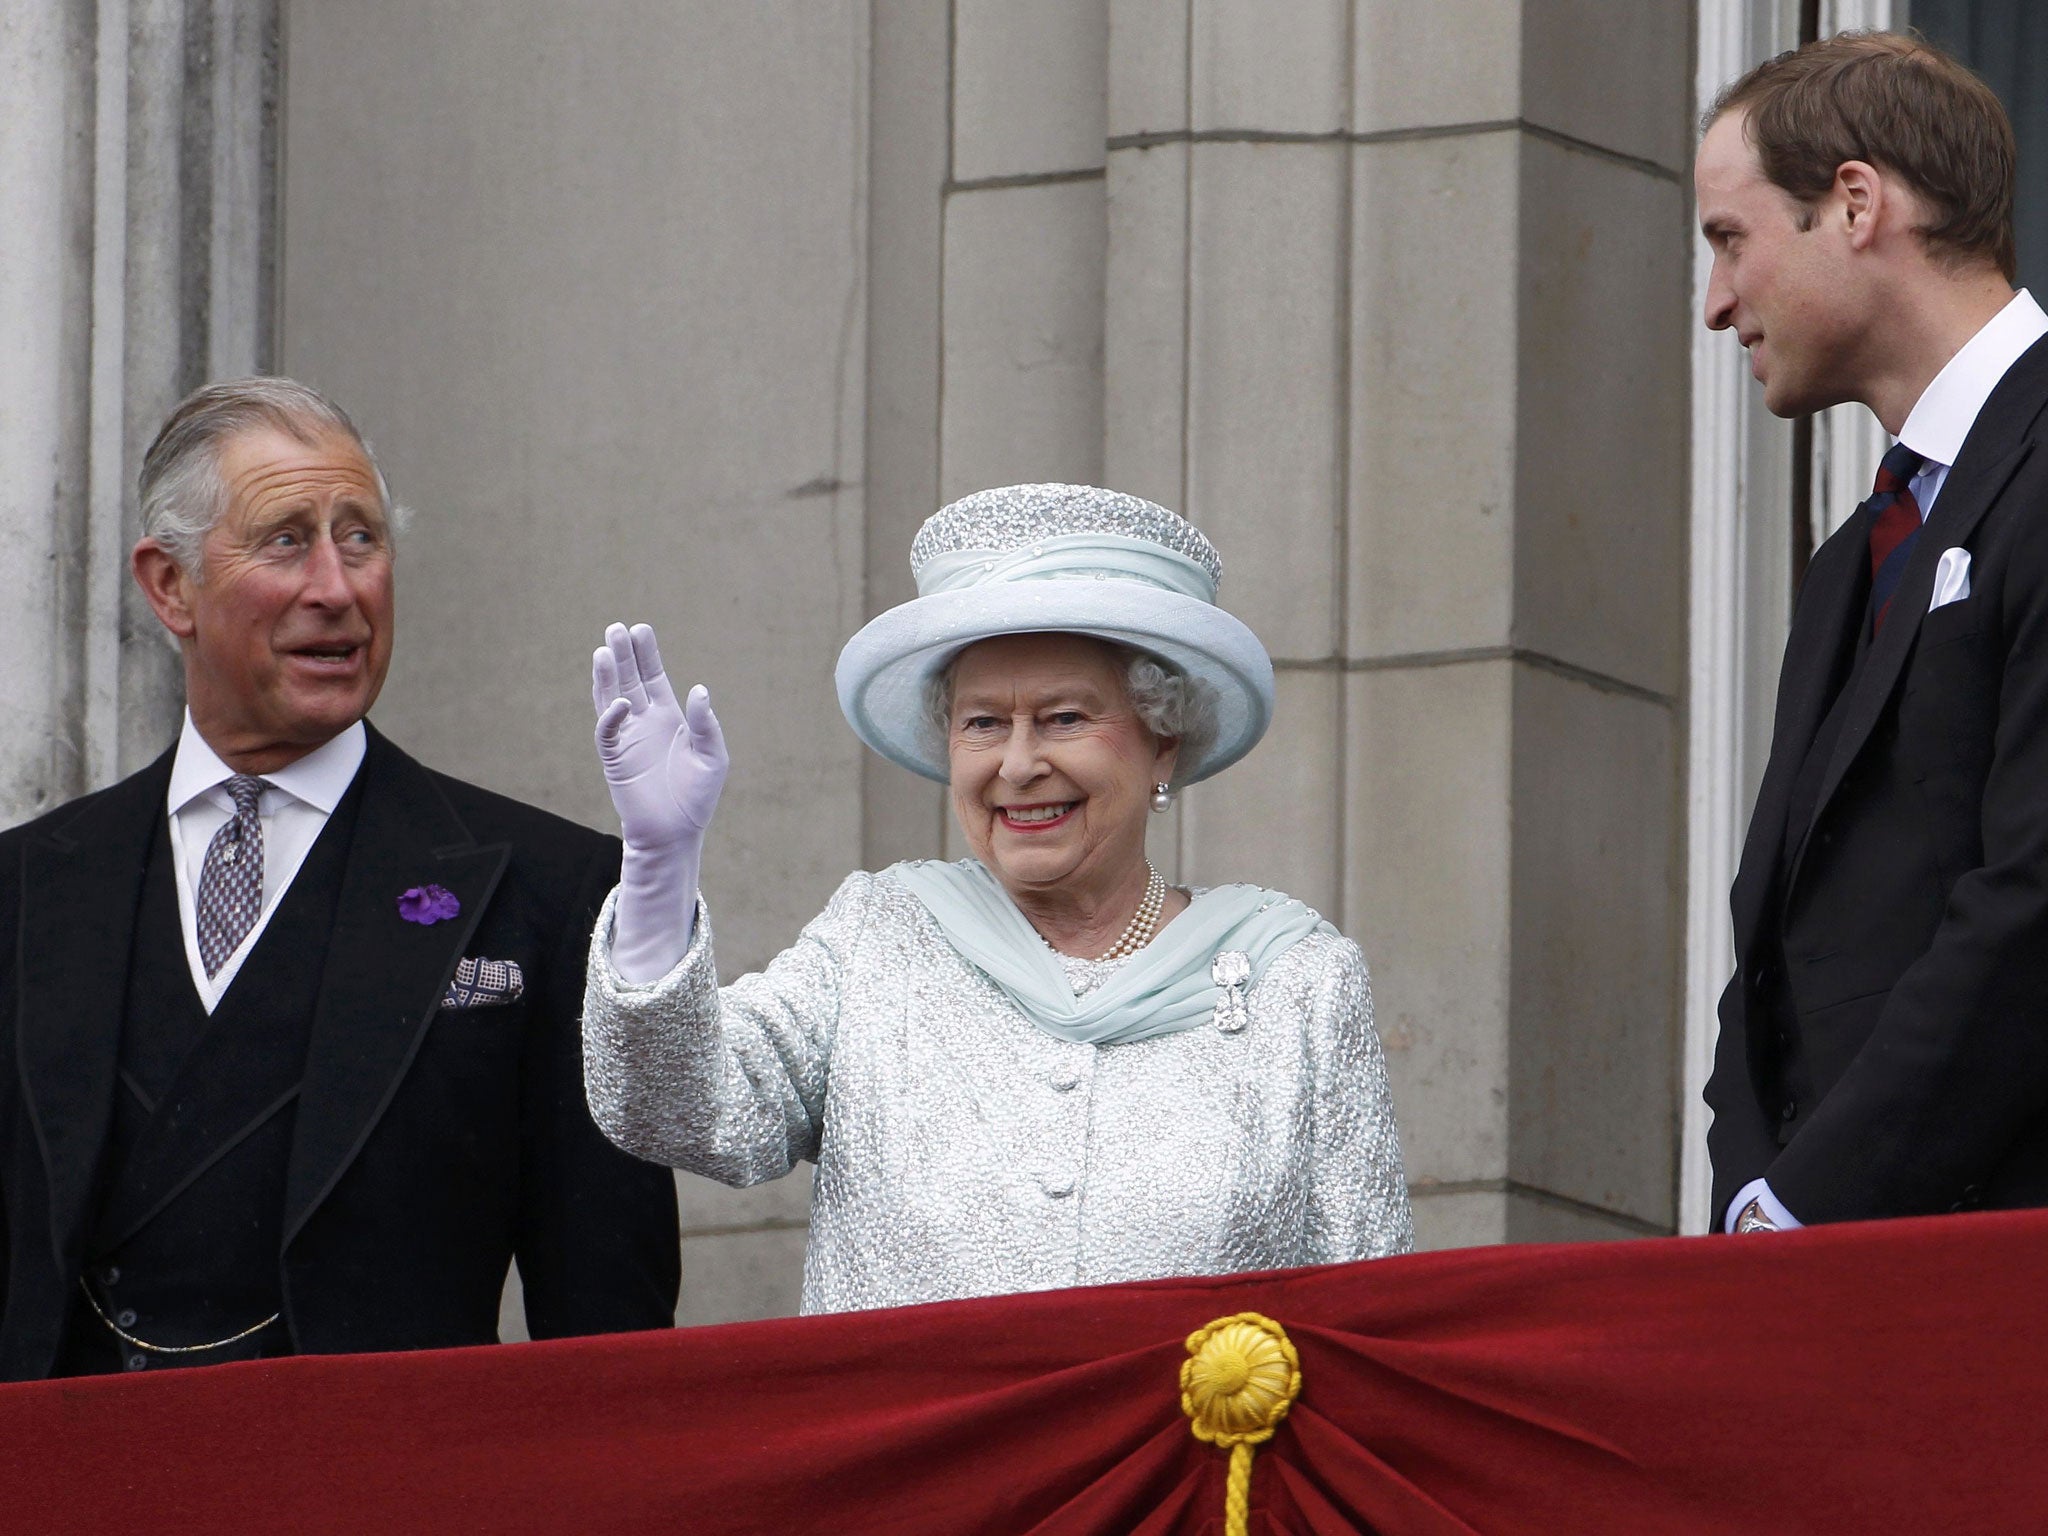 Here to stay: The Queen confirmed her durability with the Diamond Jubilee